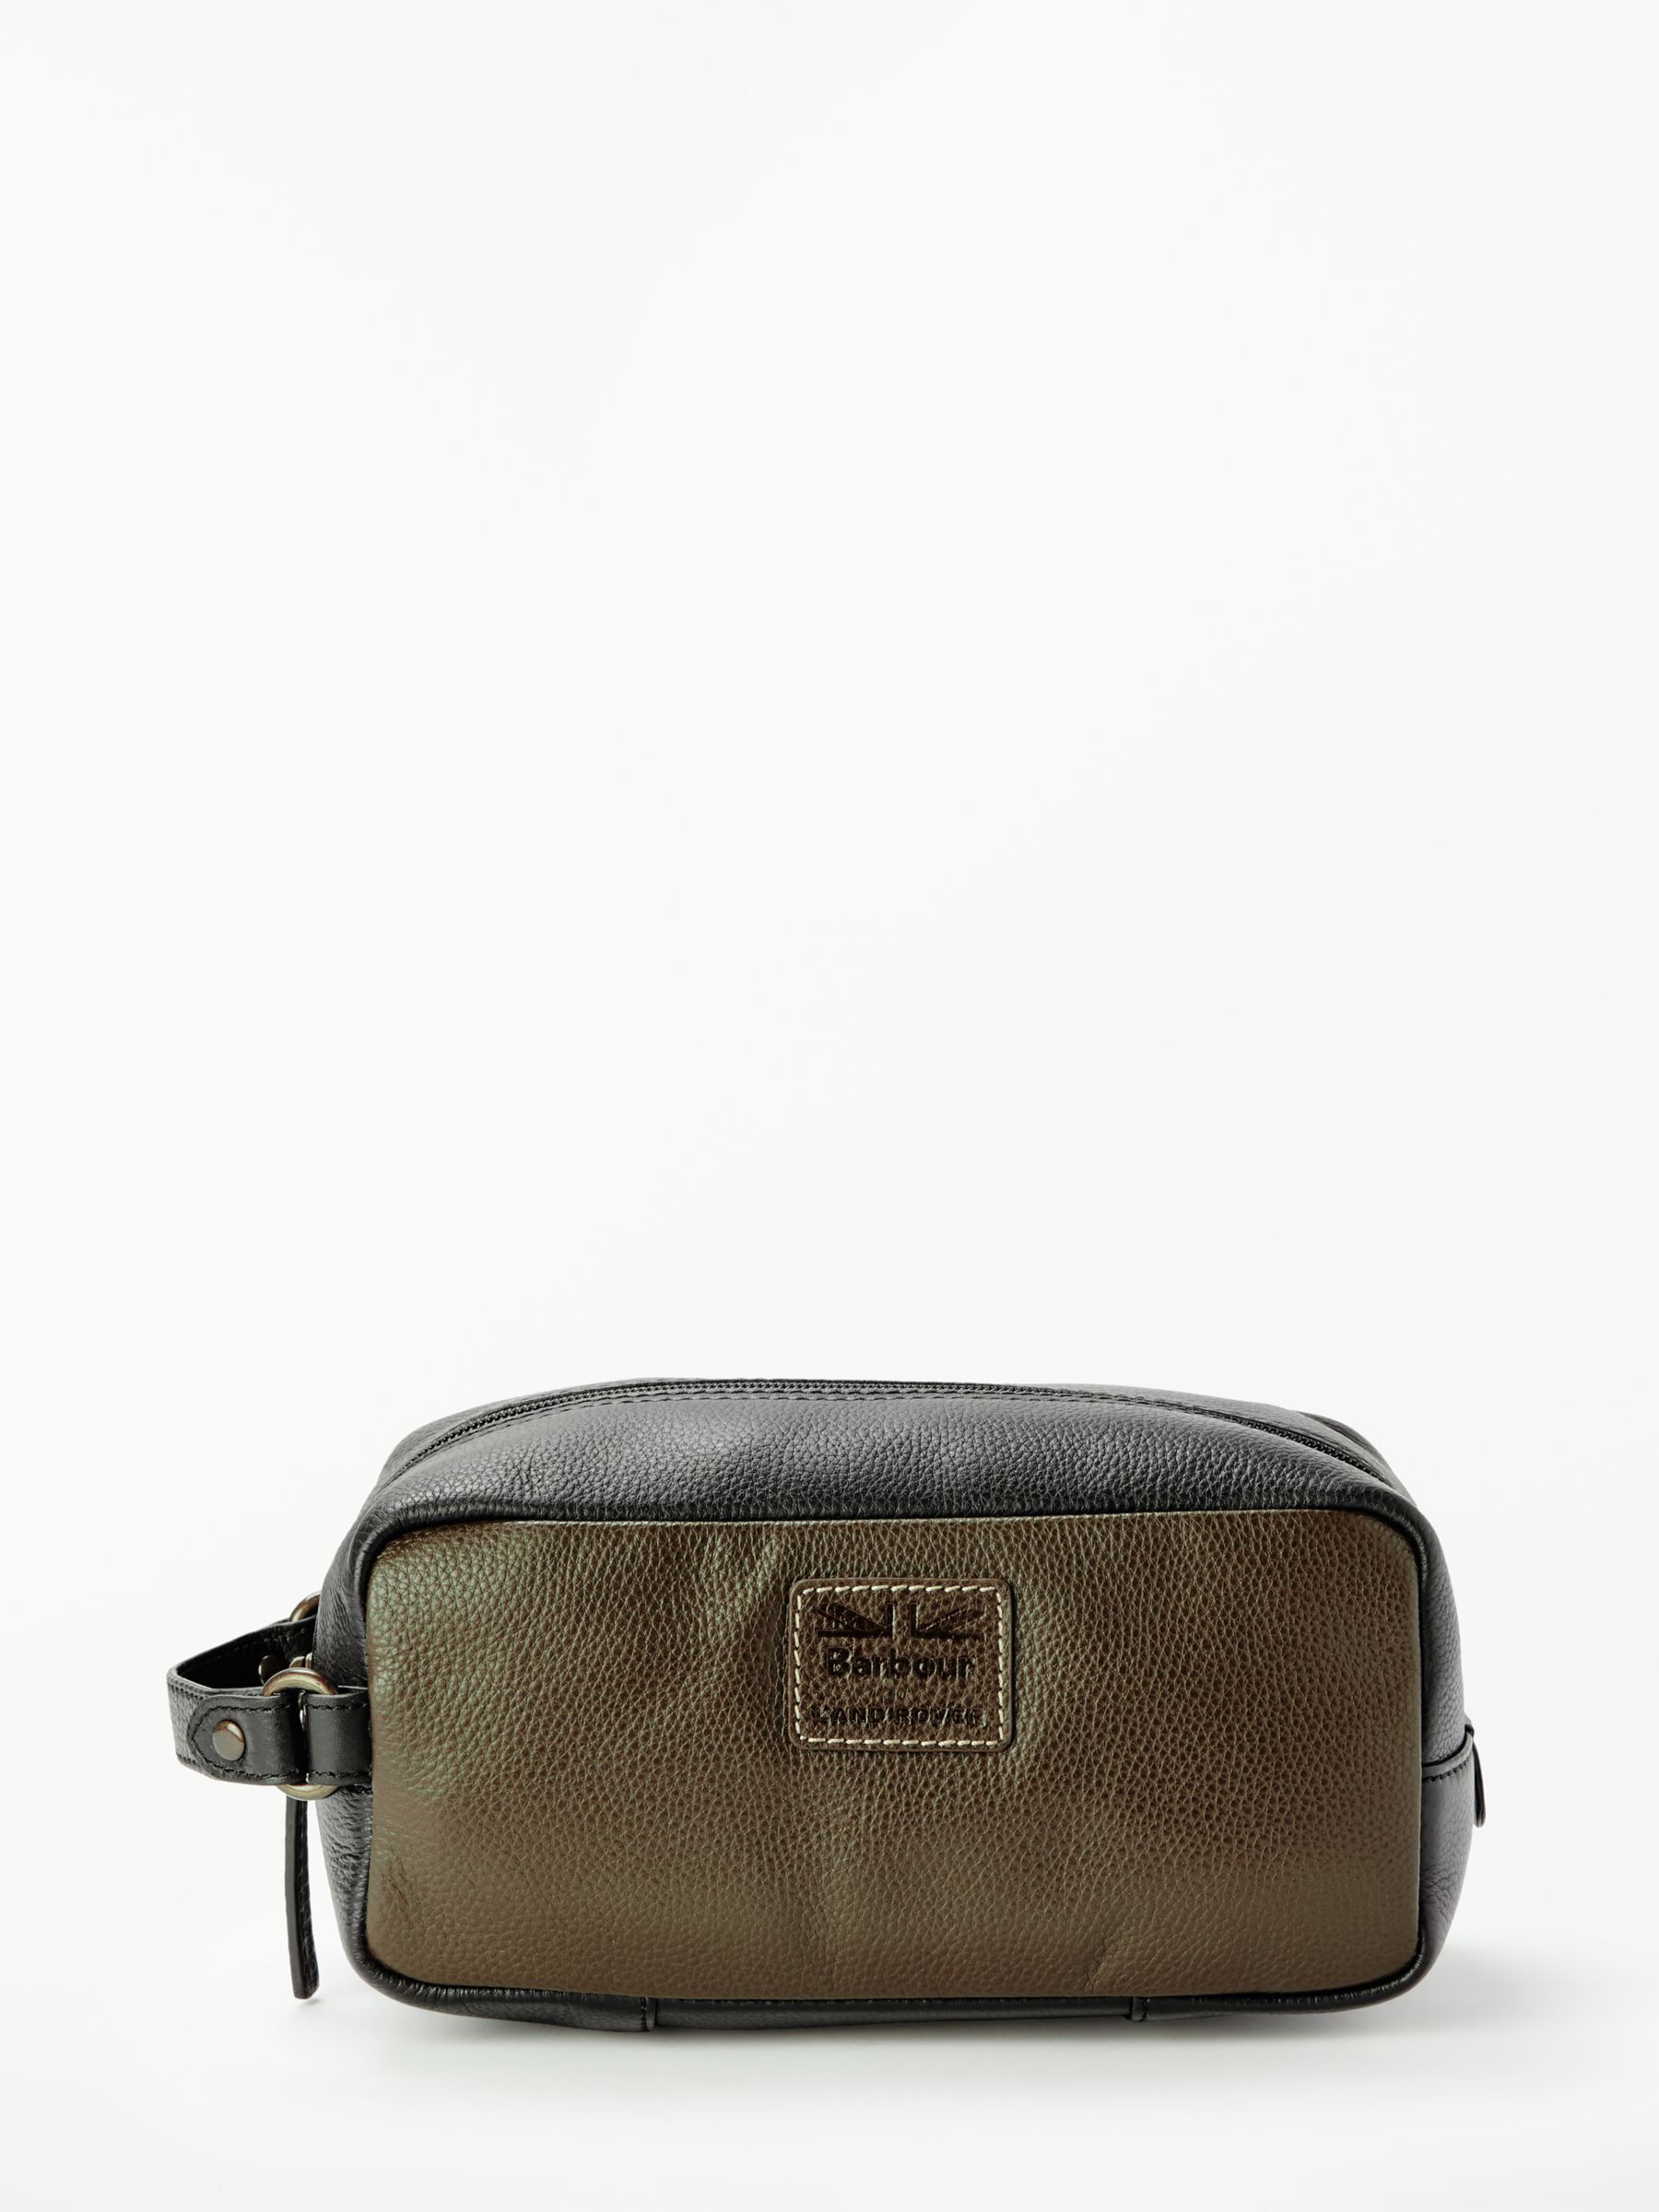 barbour land rover bag